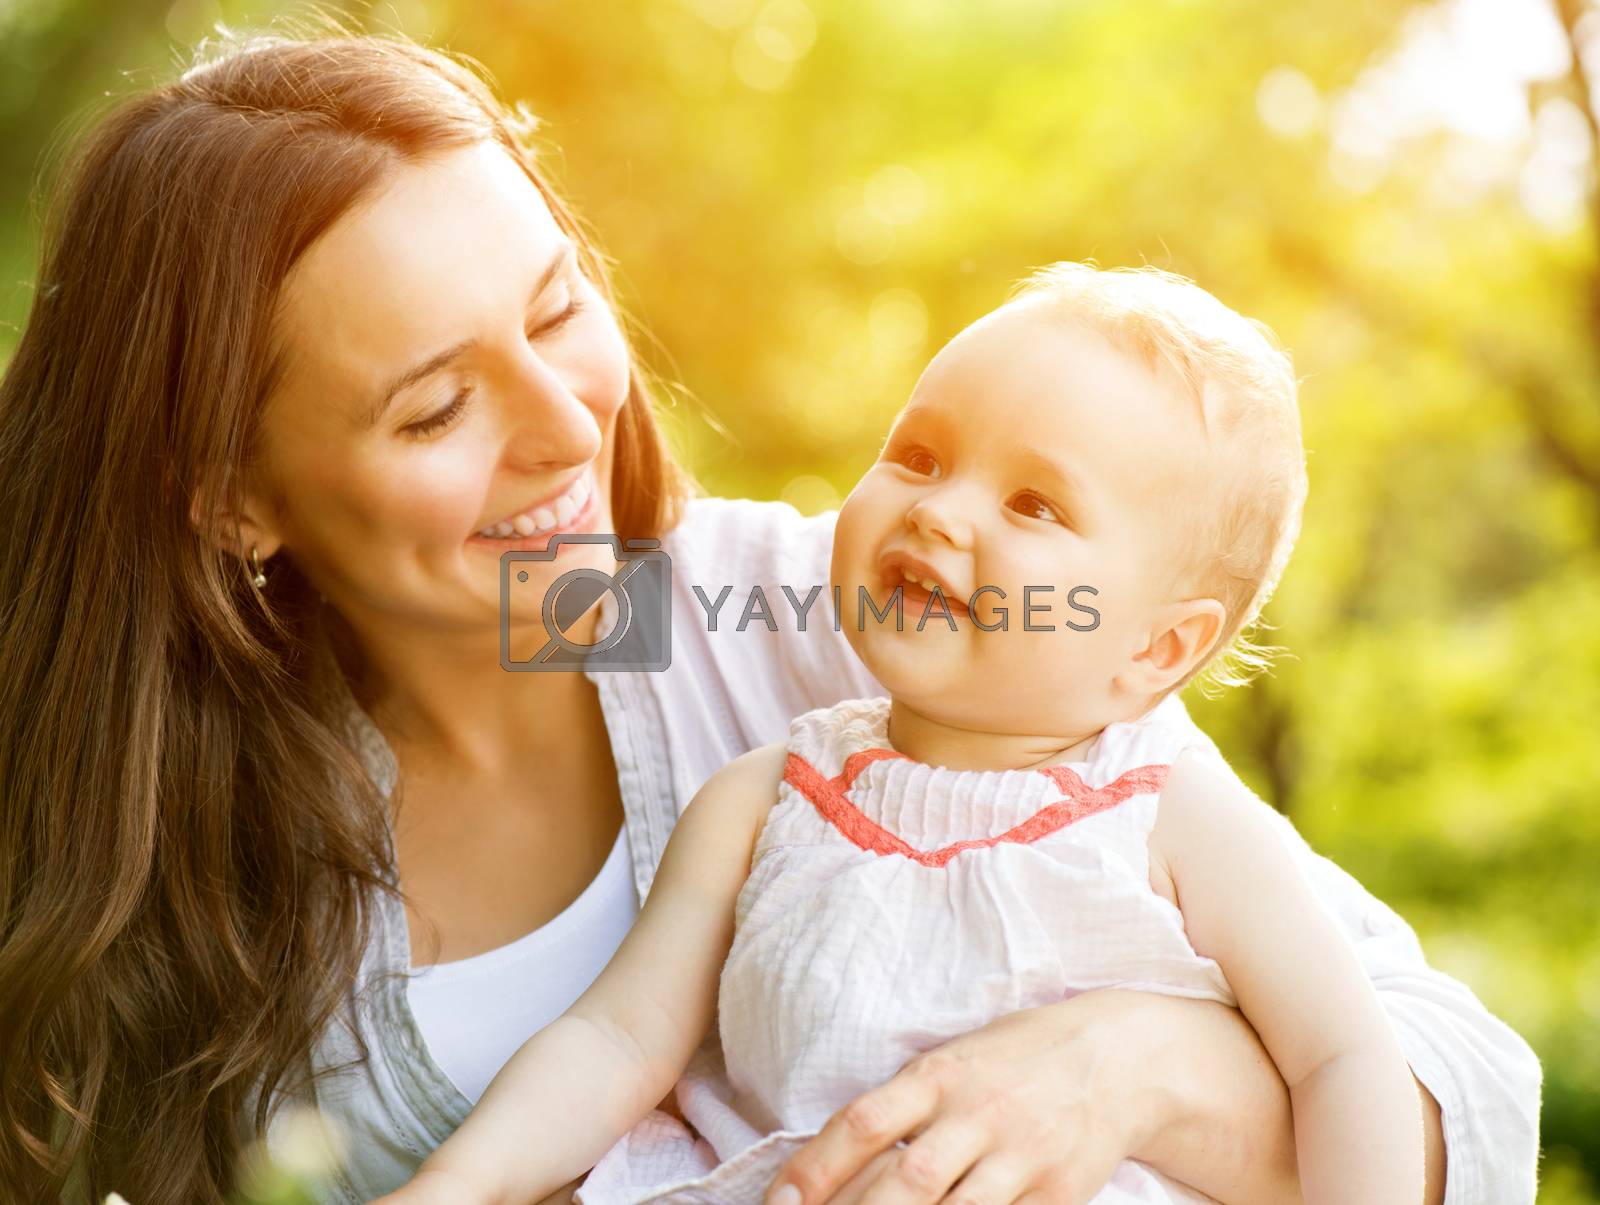 Royalty free image of Beautiful Mother And Baby outdoors. Nature by SubbotinaA